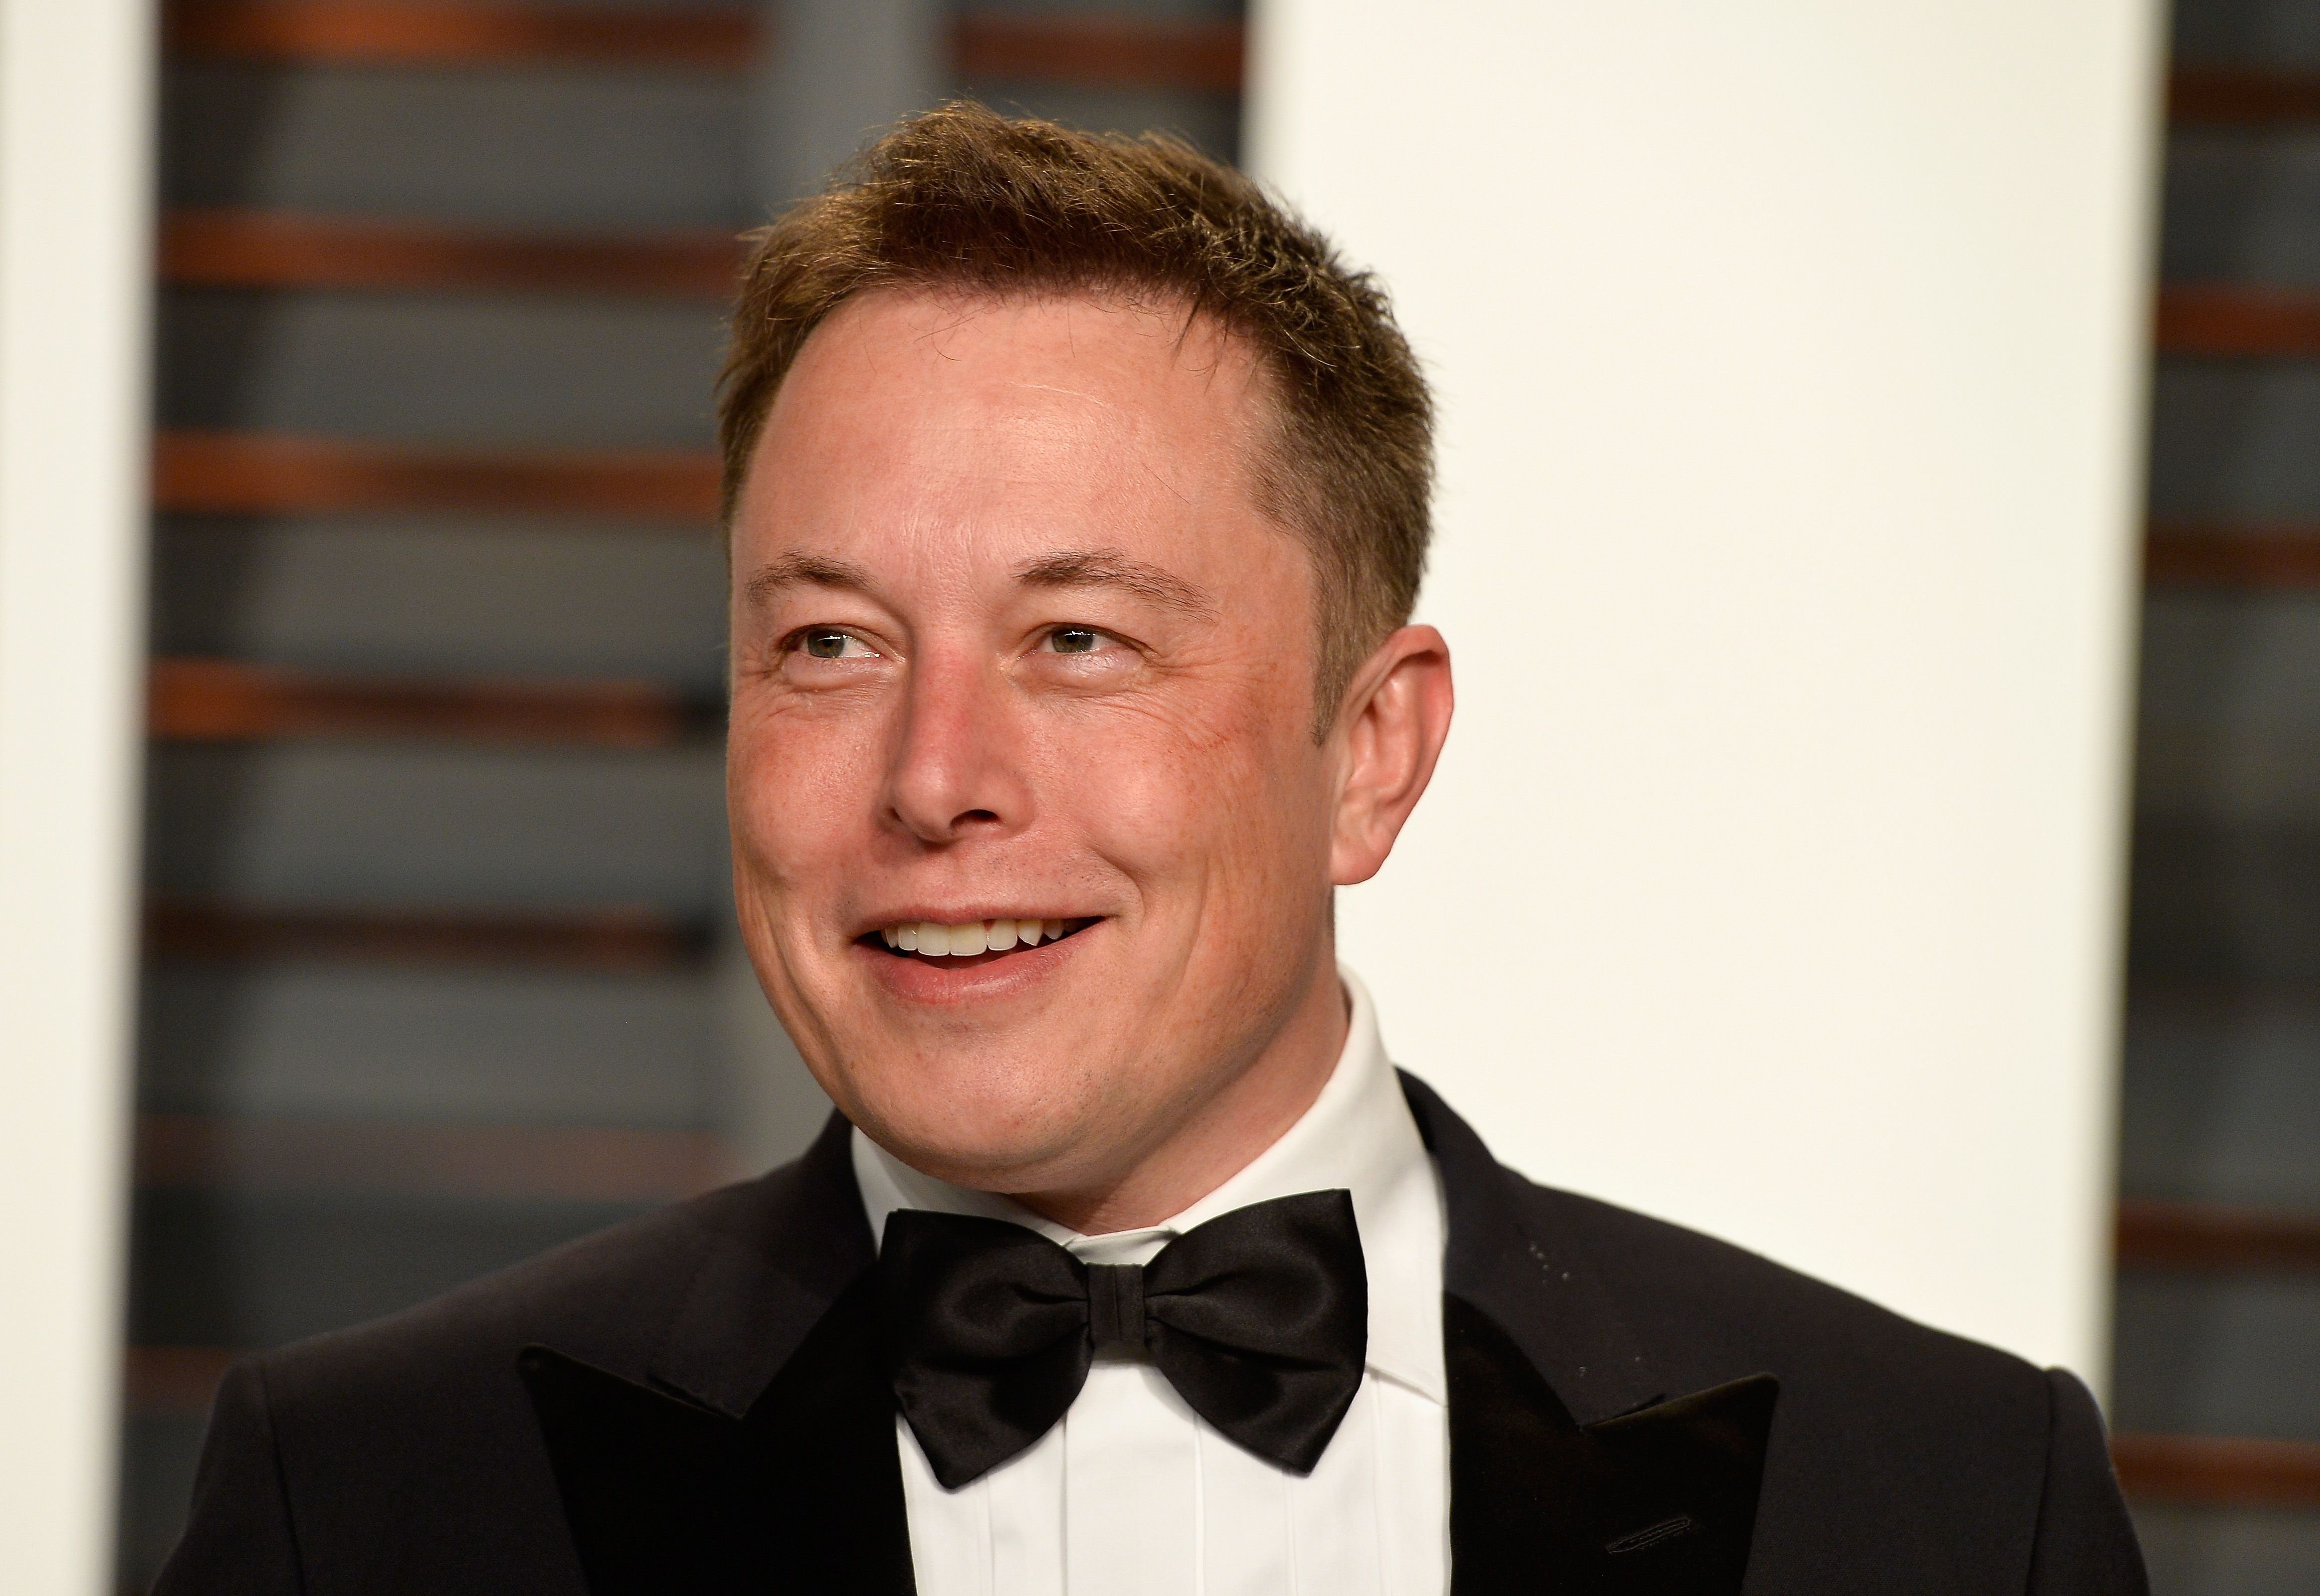 Elon Musk at the Vanity Fair Oscar Party on February 22, 2015. | Photo: Getty Images